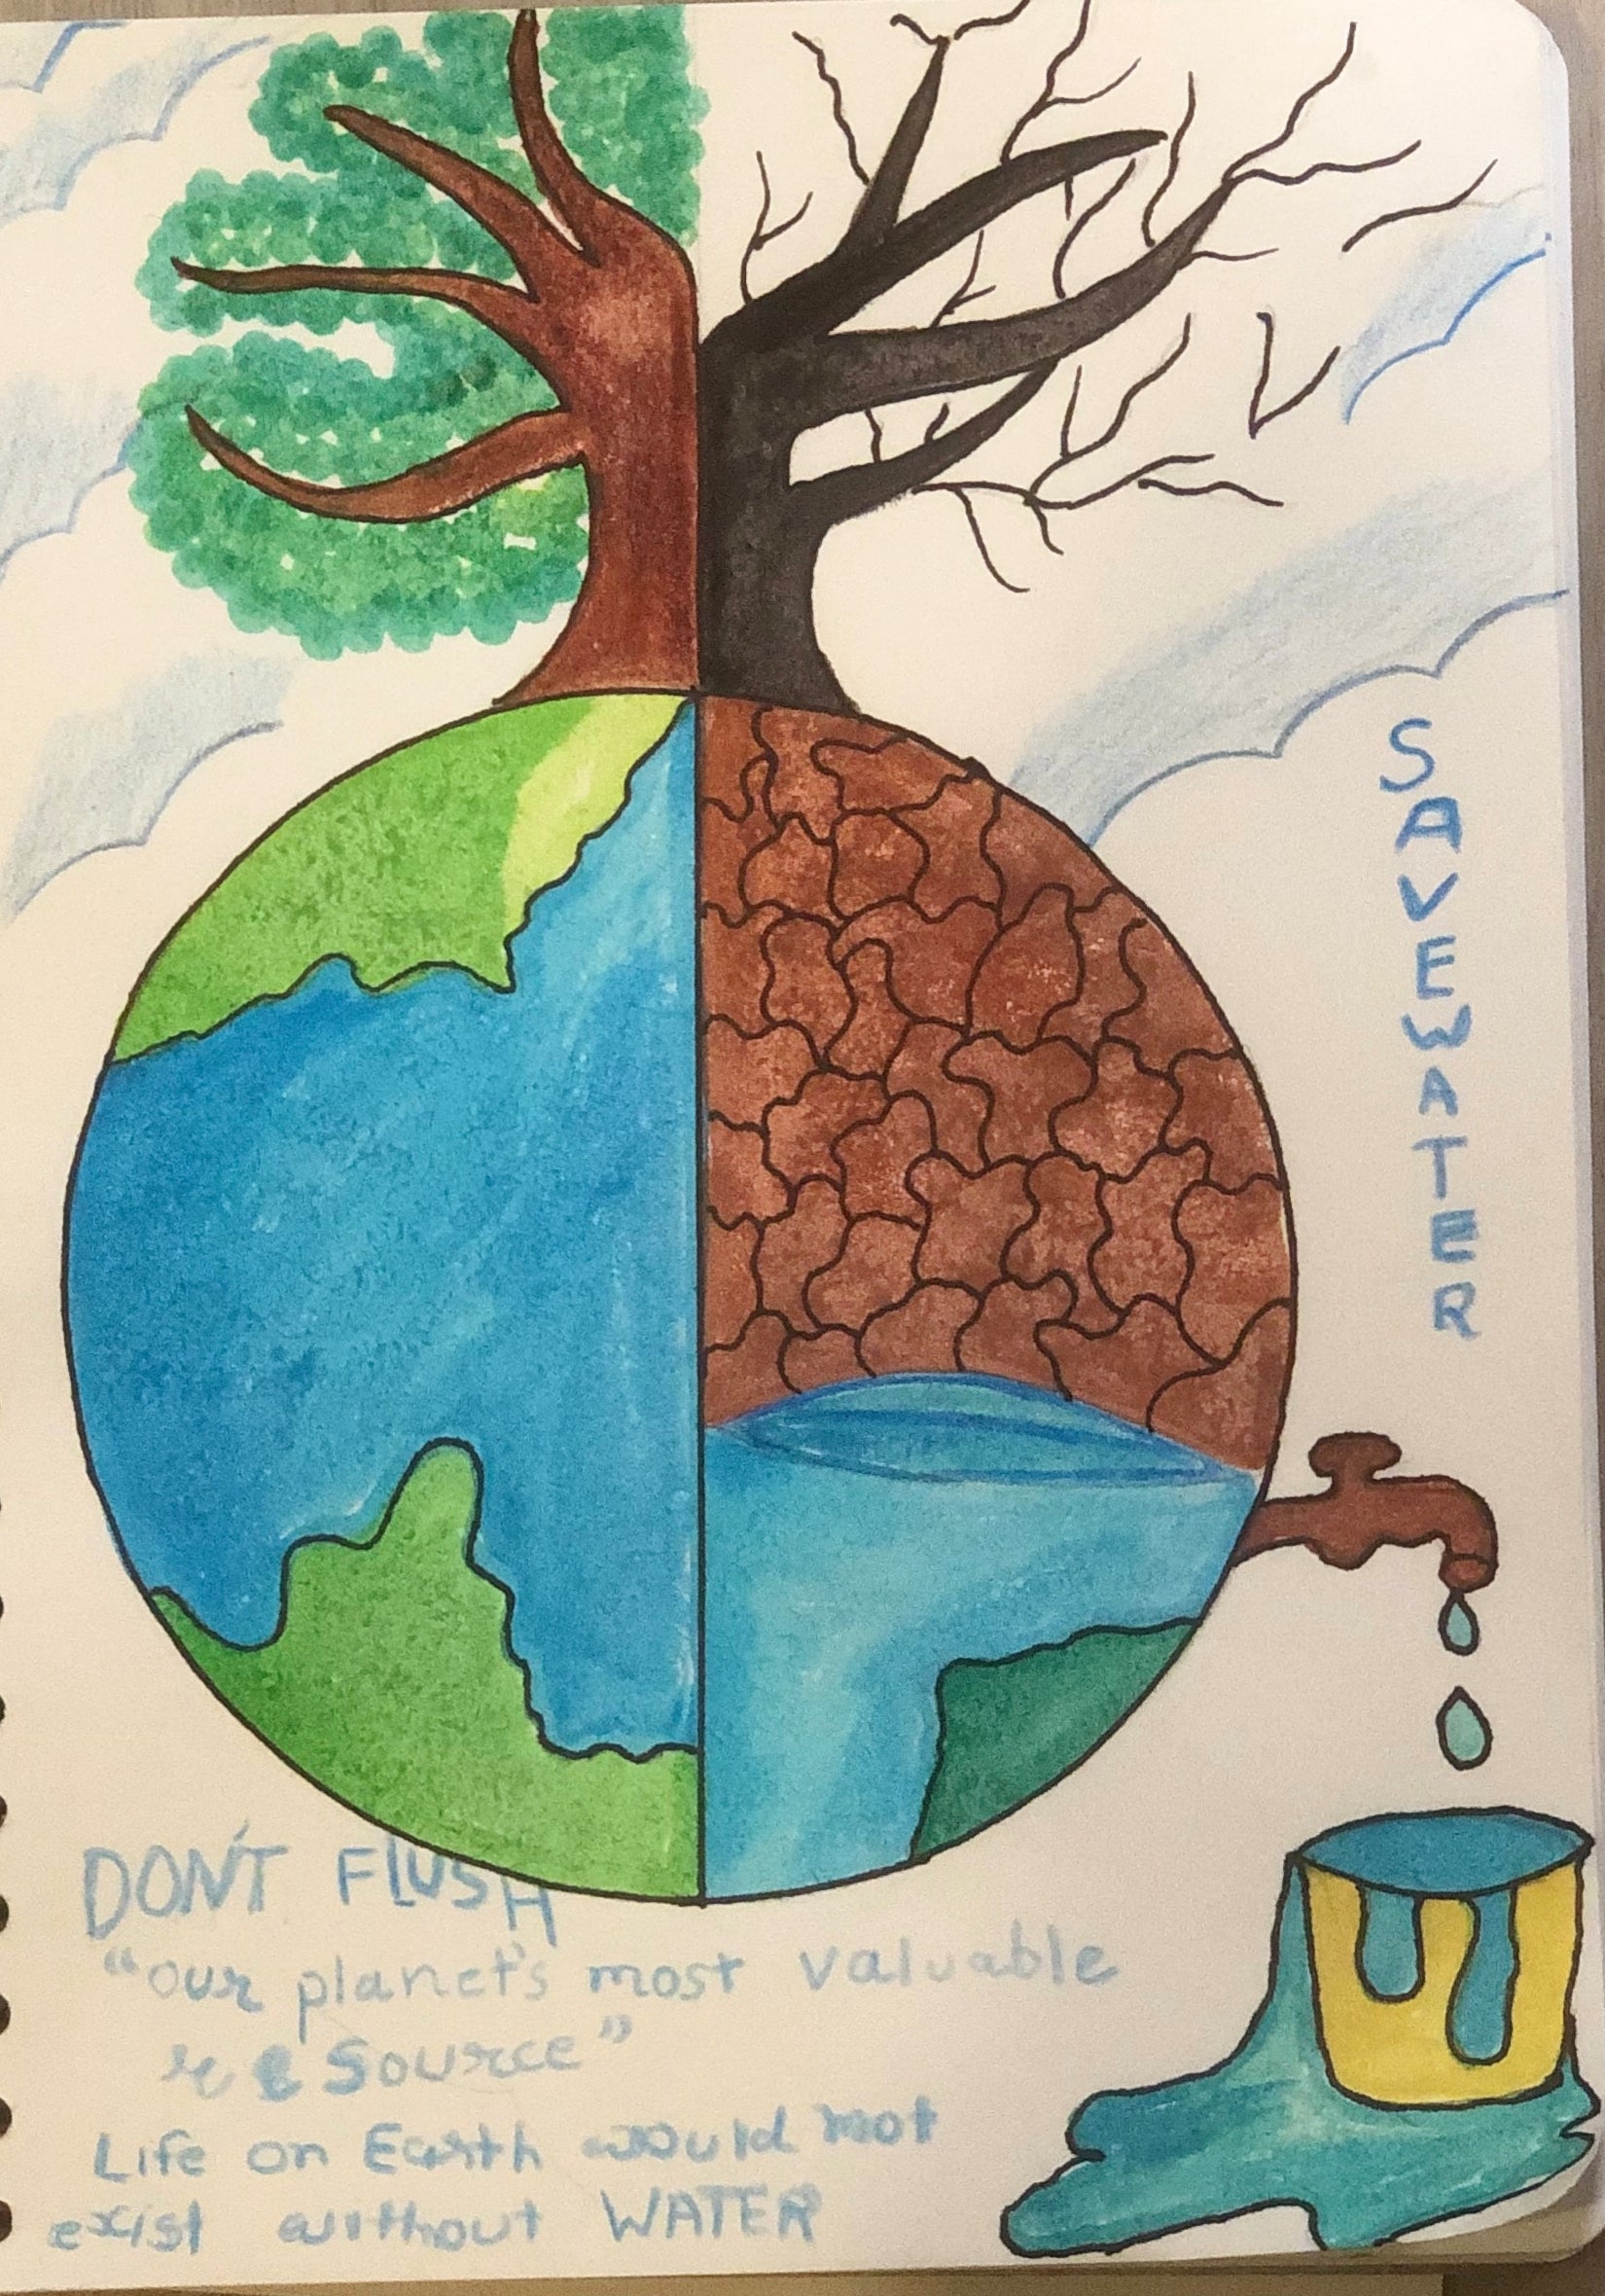 Art by Samaria Half the earth is healthy while the other half is drained of its water